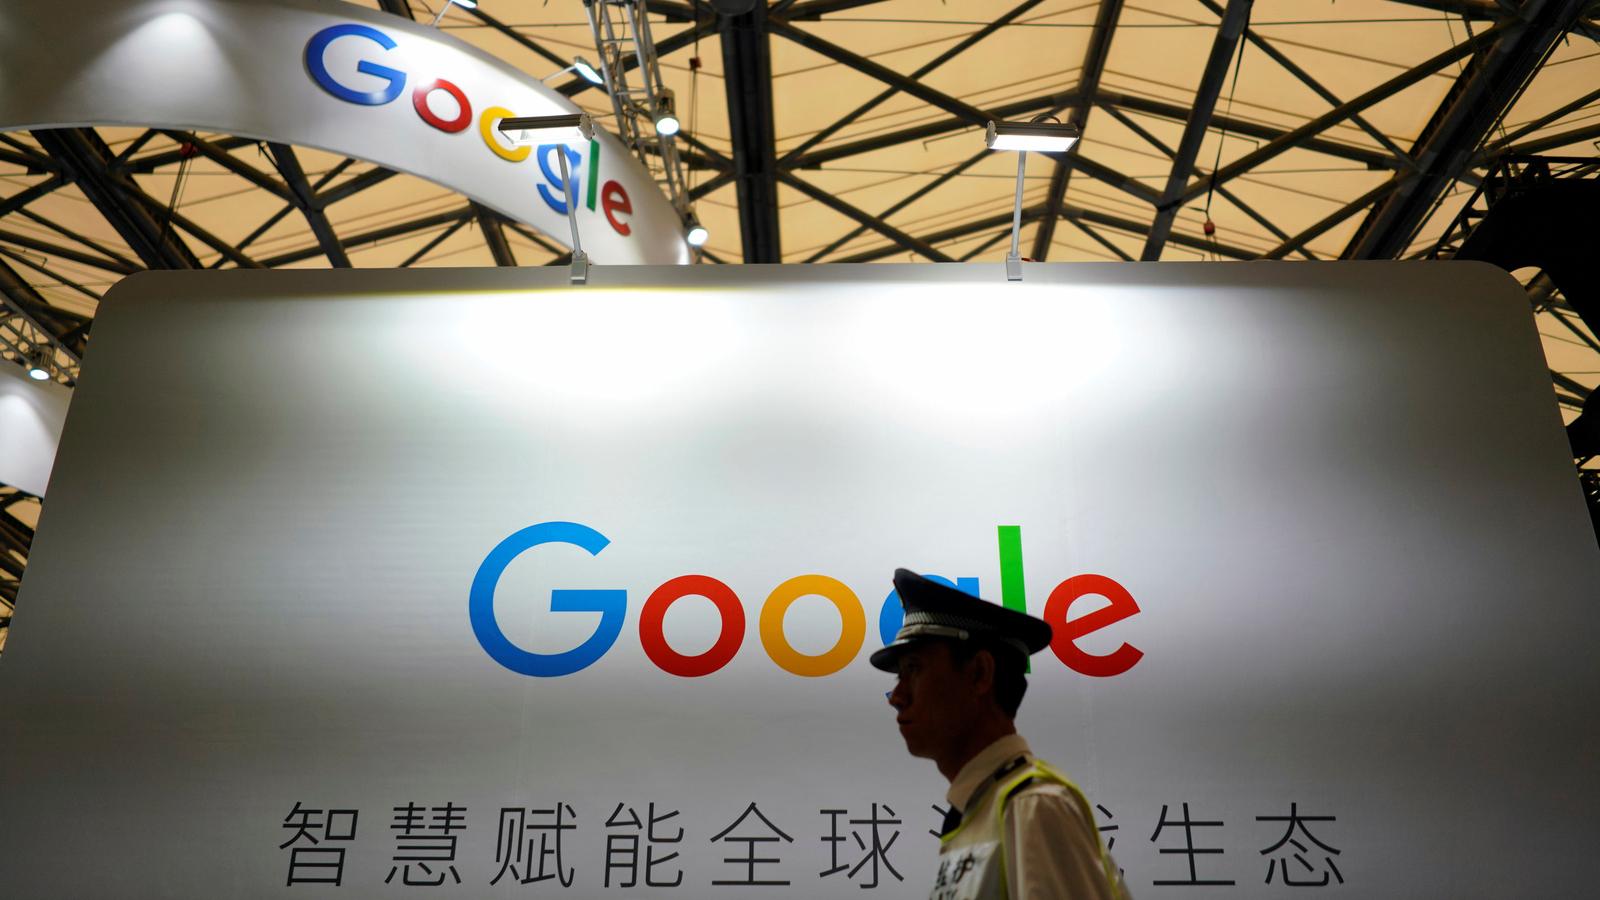 Google sign in shadows at conference in Shanghai